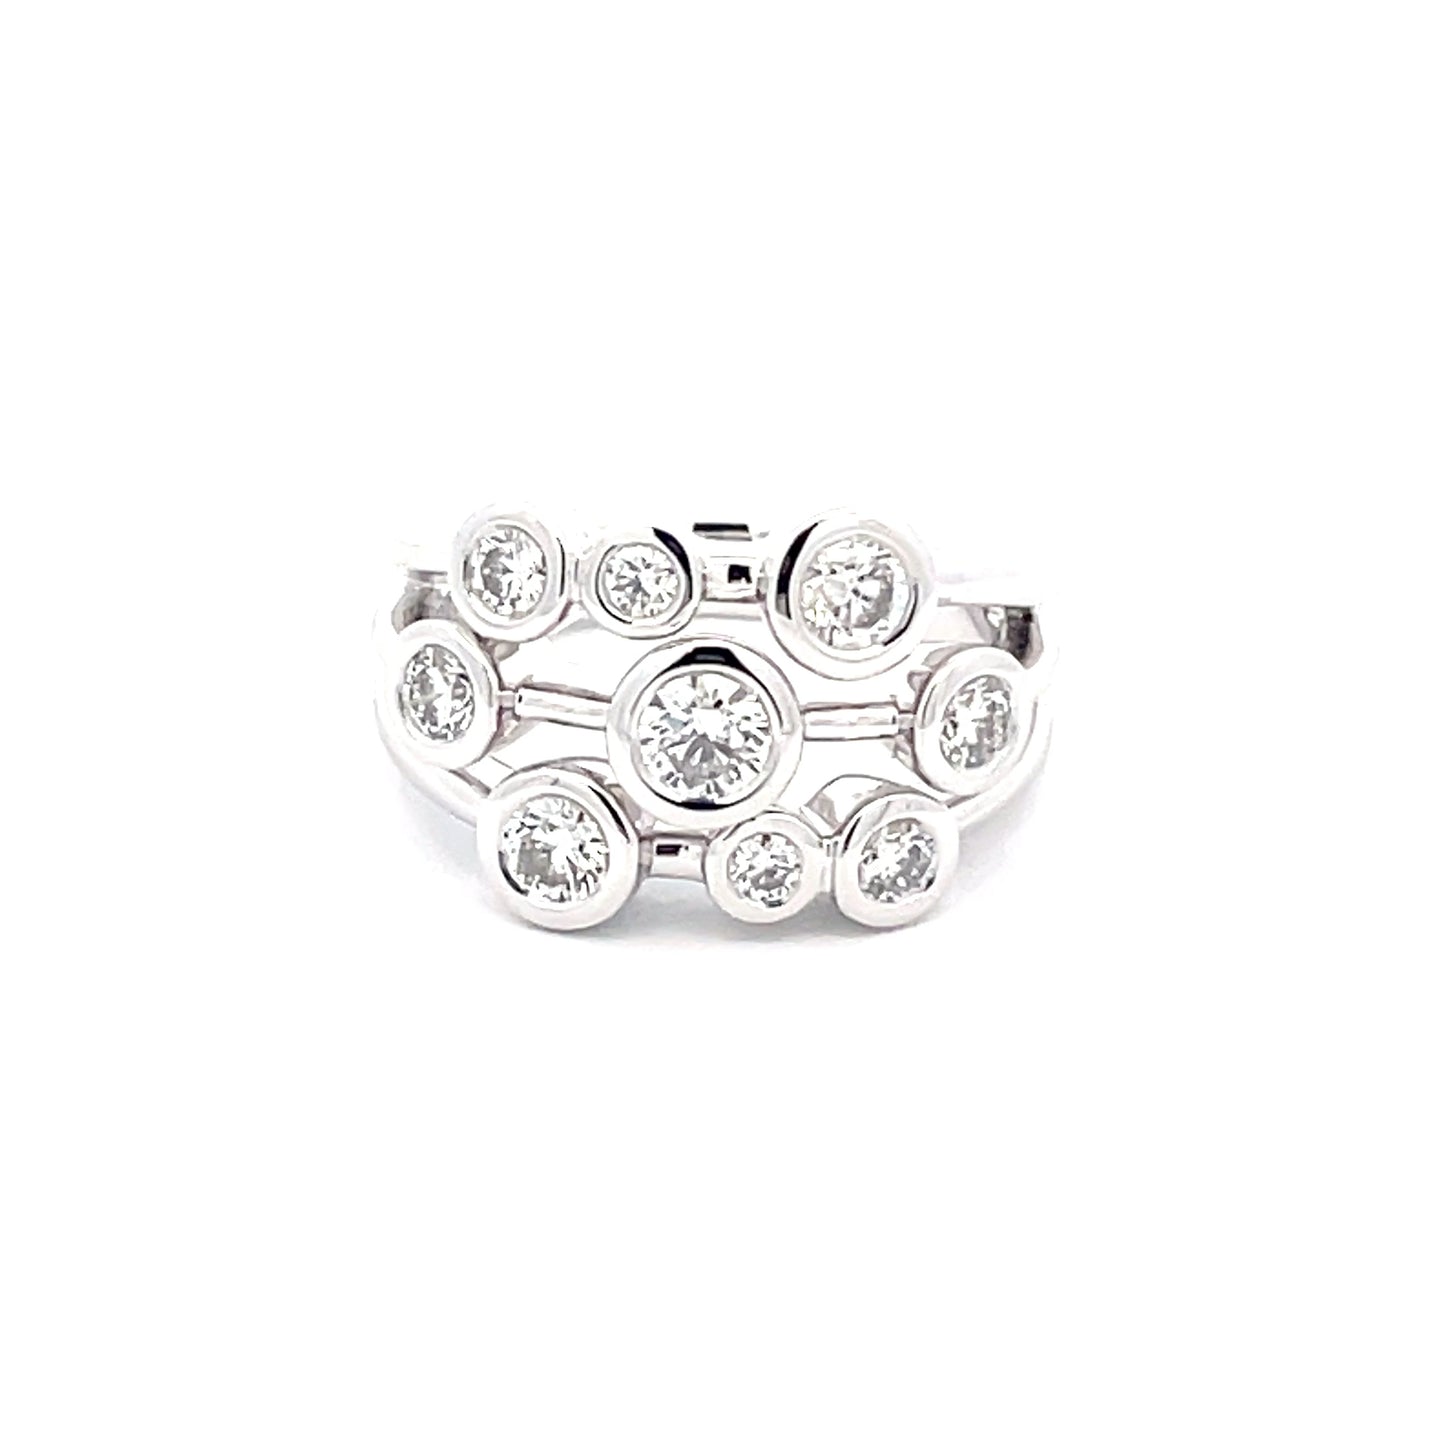 Round Brilliant Cut Diamond Bubble Style Ring - 1.12cts  Gardiner Brothers   